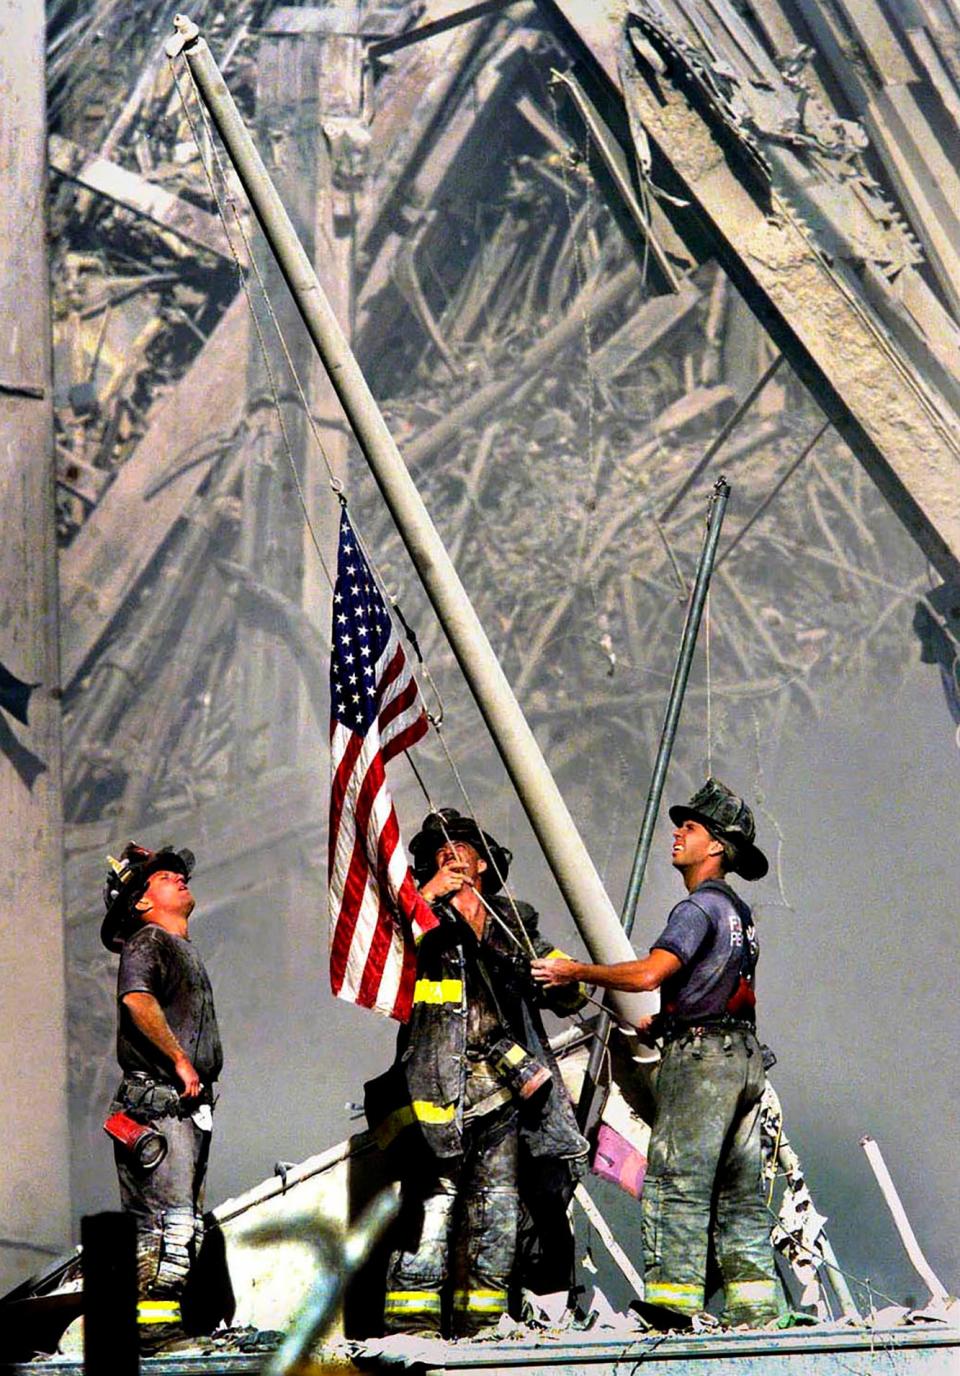 NYC firemen raise the American flag at Ground Zero after the terrorist attacks on the World Trade Center, taken on September 11th, 2001.